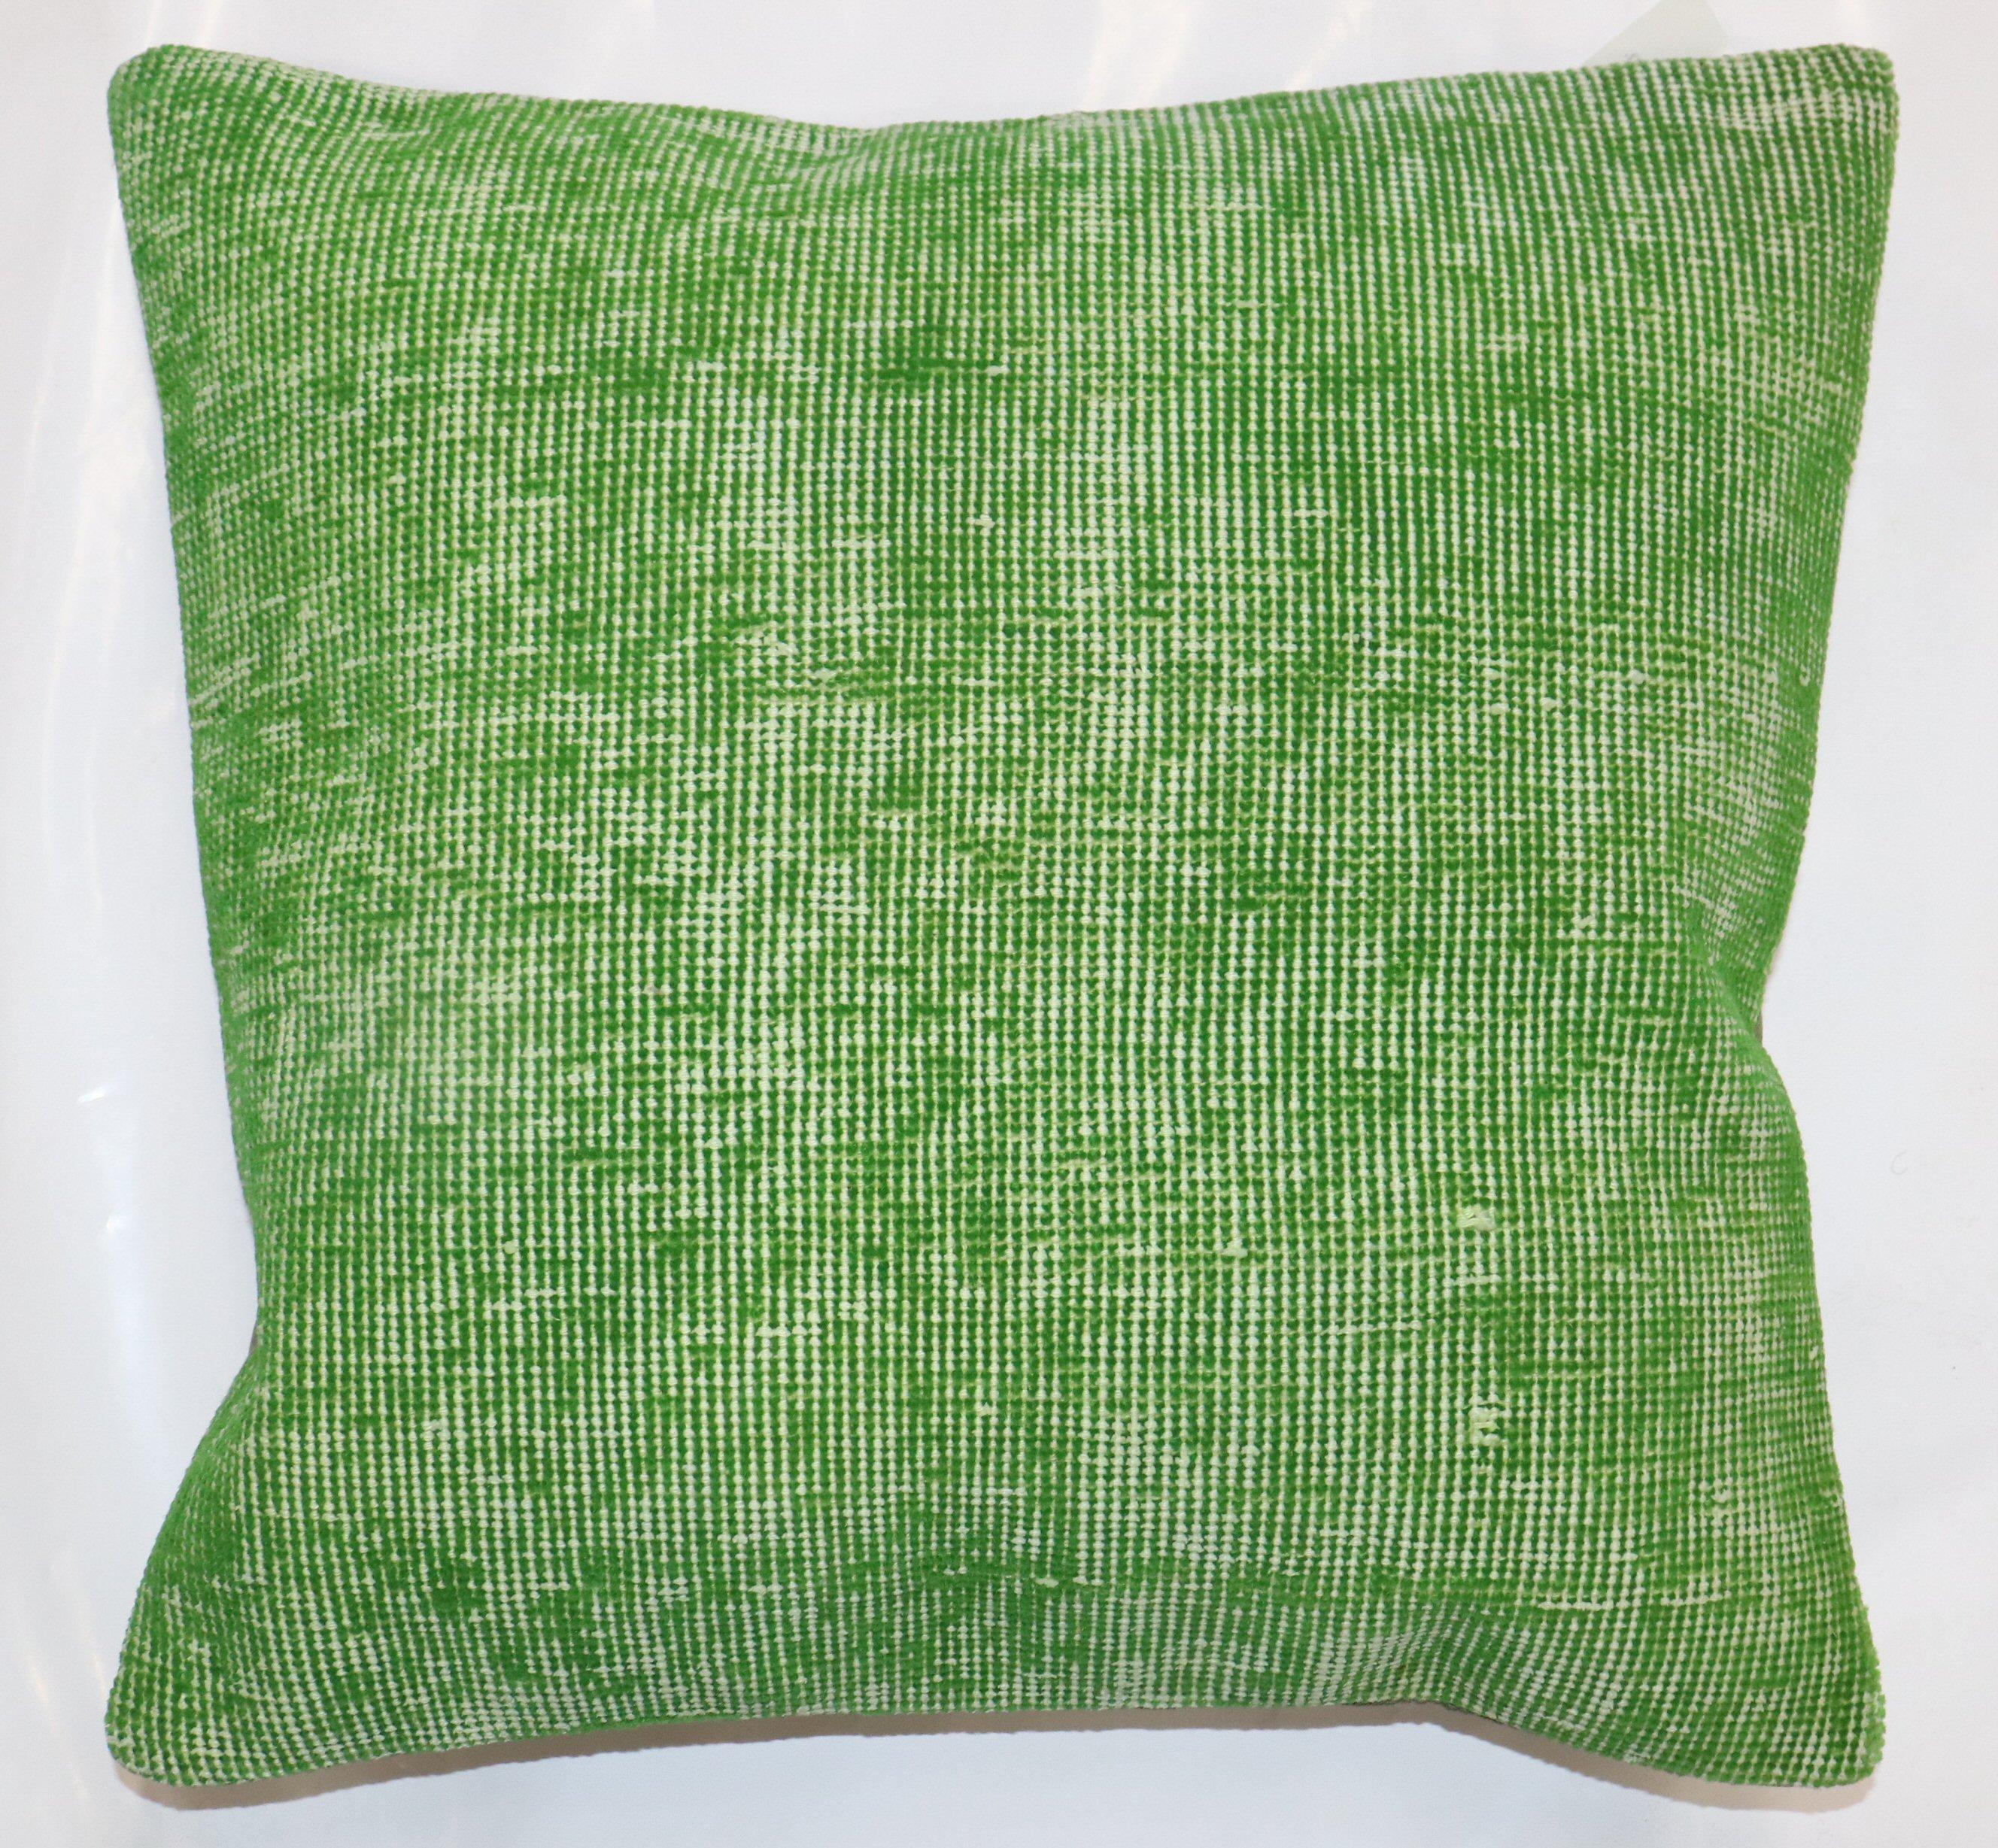 Pillow made from a vintage Turkish green deco rug. 

Measures: 18” x 18”.